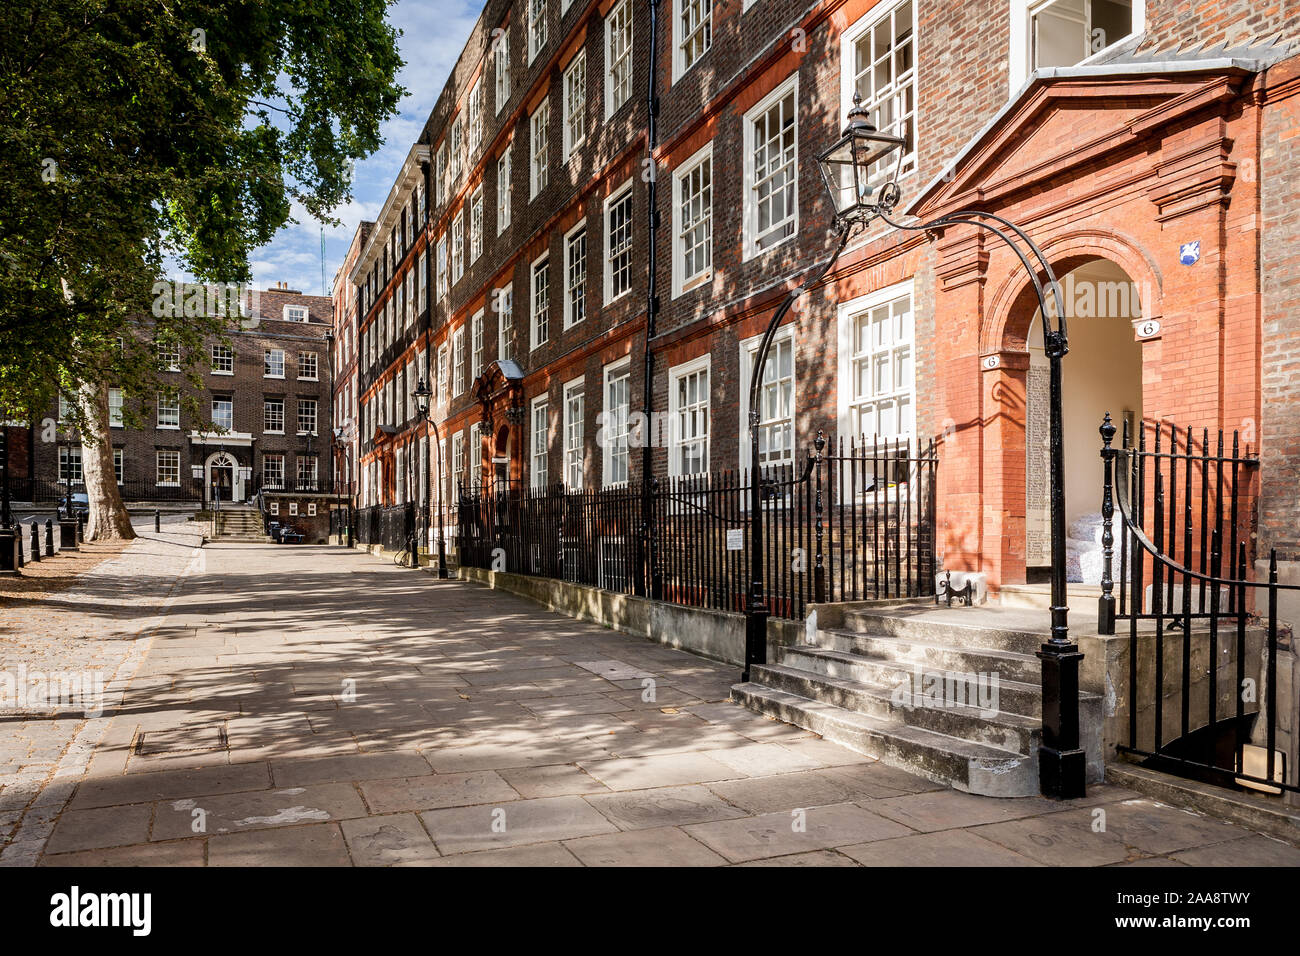 Temple, London. A view along Kings Bench Walk within London's historic legal district. Stock Photo